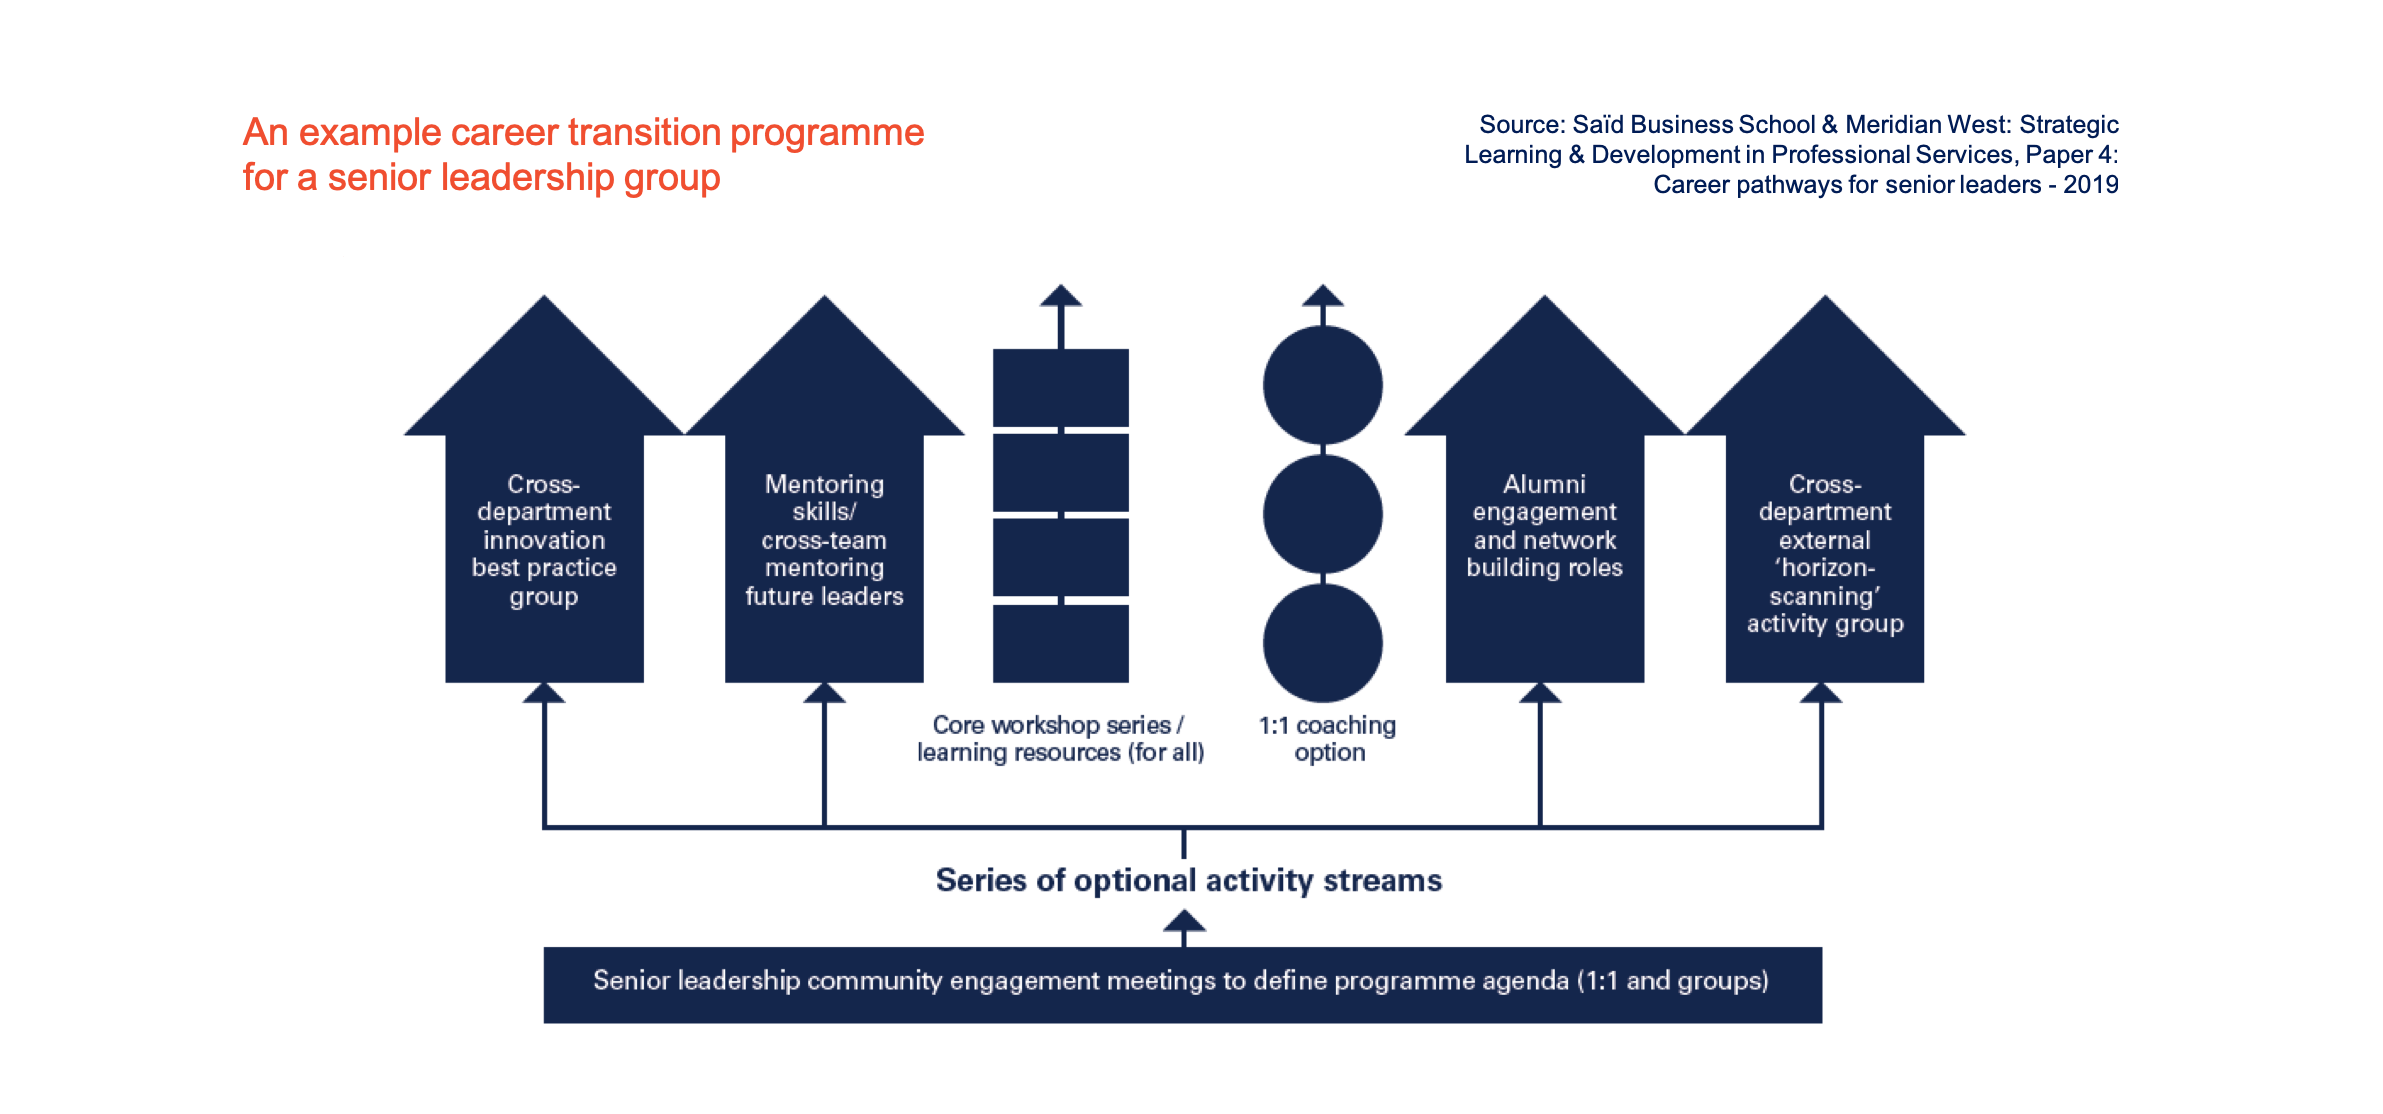 An example career transition programme for a senior leadership group